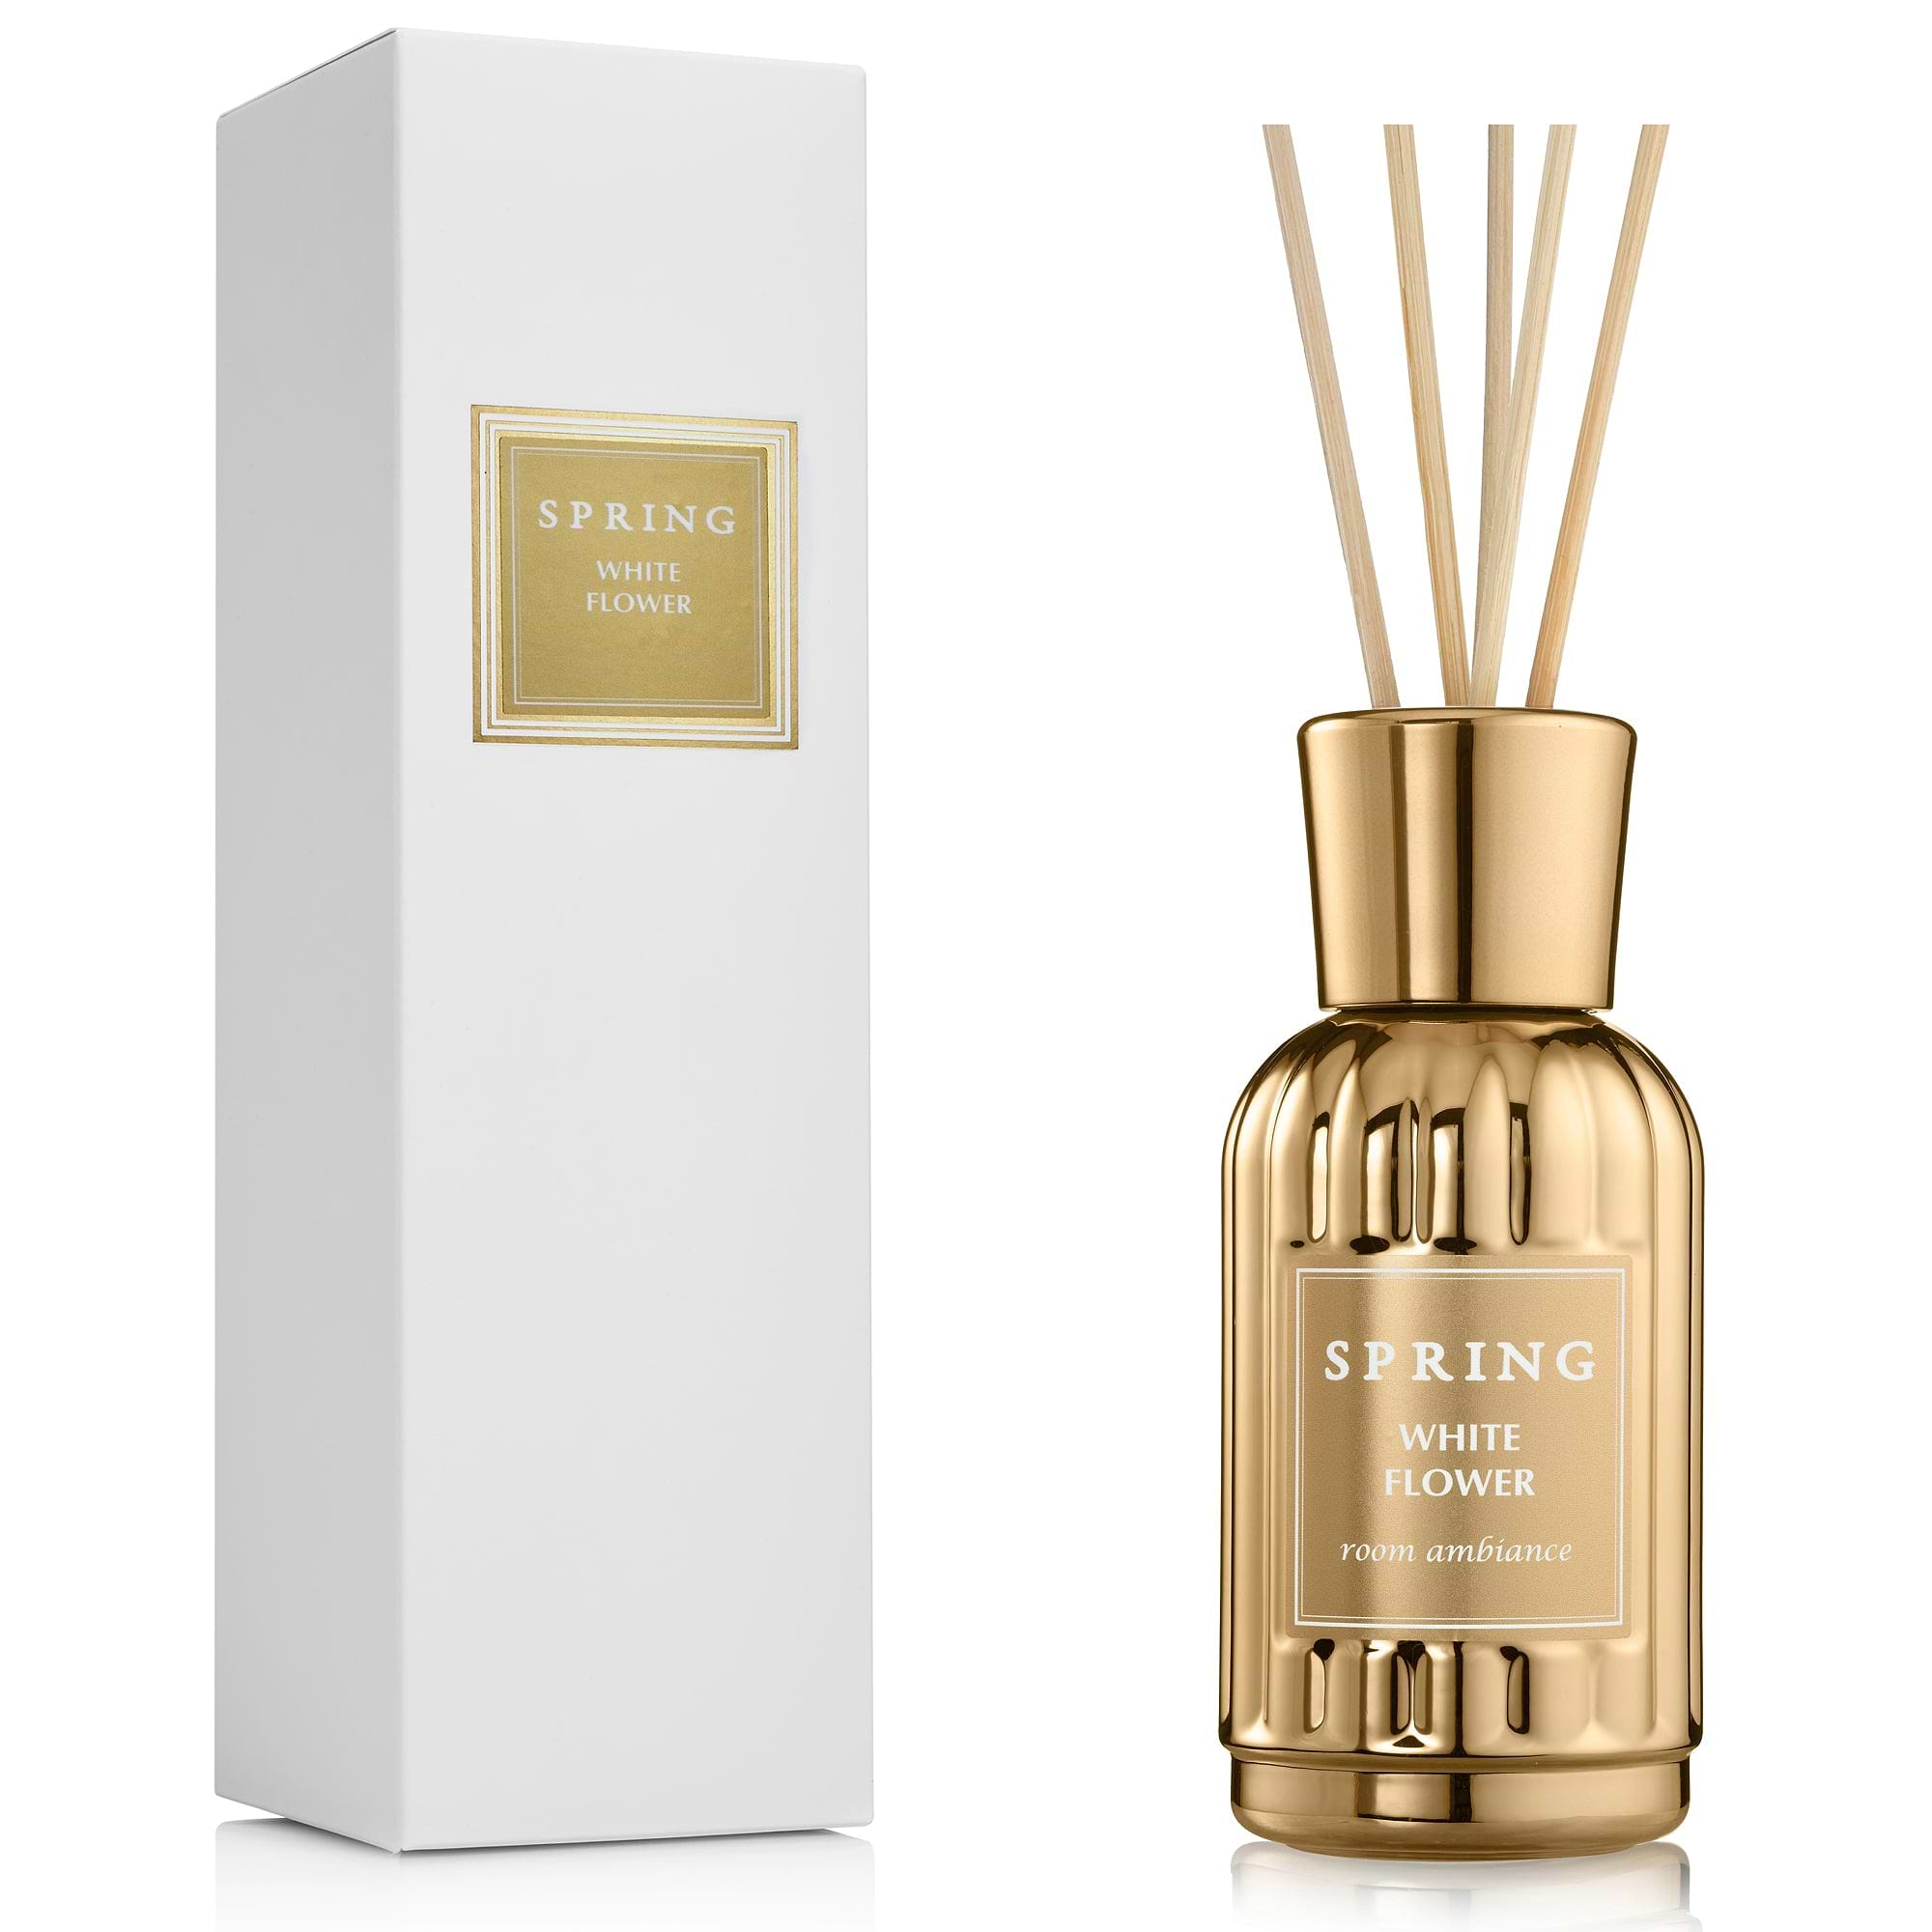 SPRING Fragrance golden Reed Diffuser | Fragrance Made in France | White Flower fragrance | Lily, Jasmine, Lily of The Valley, and Tuberose | 3.4 oz